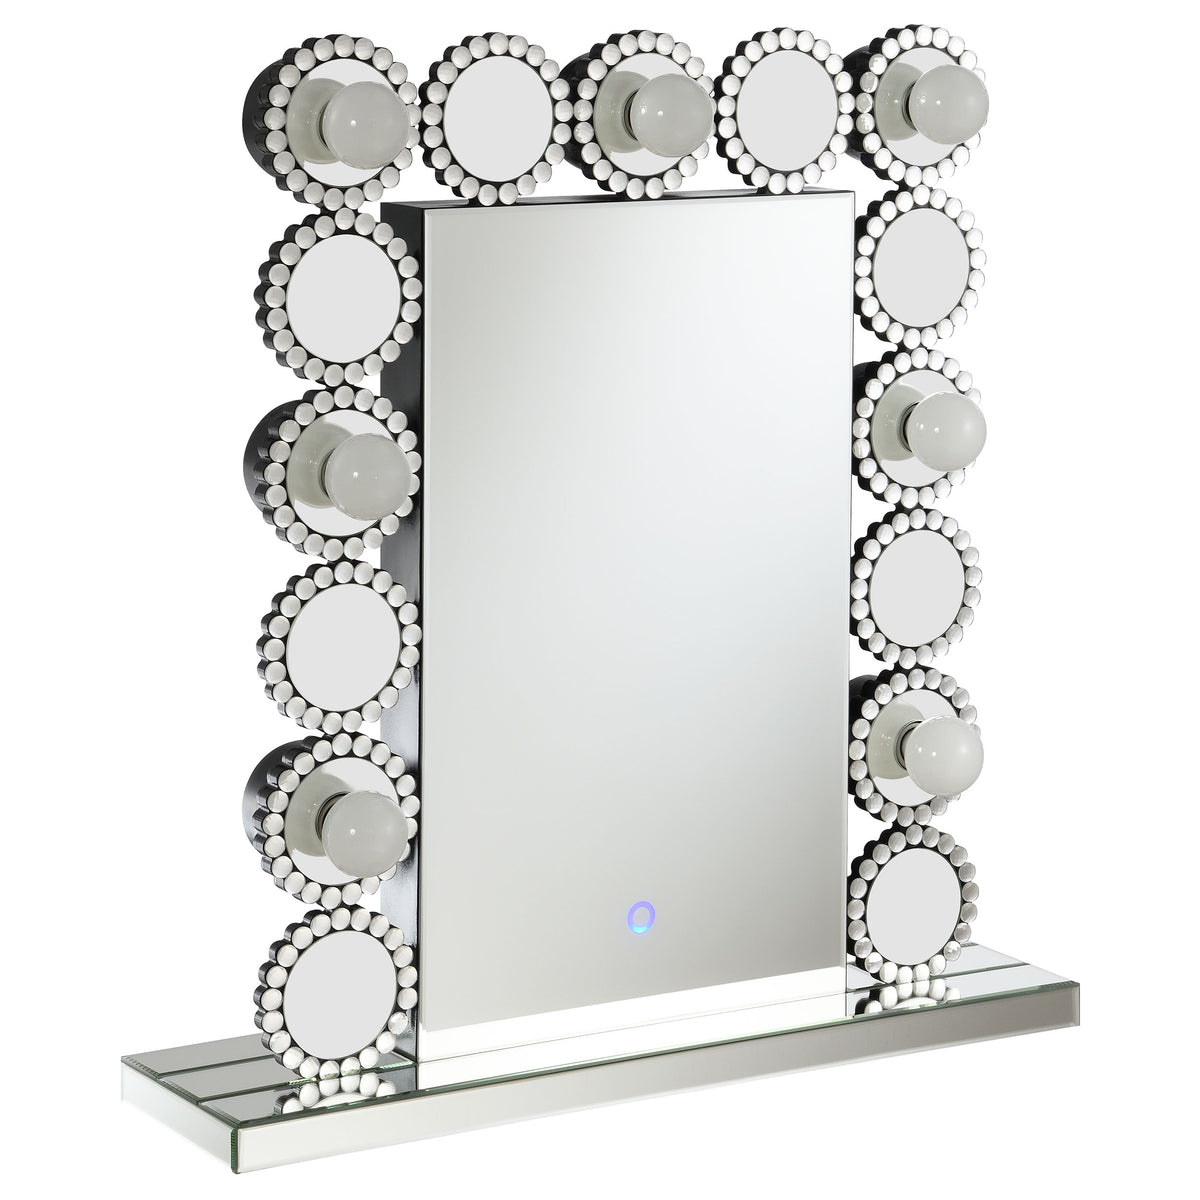 Aghes Rectangular Table Mirror with LED Lighting Mirror  Las Vegas Furniture Stores